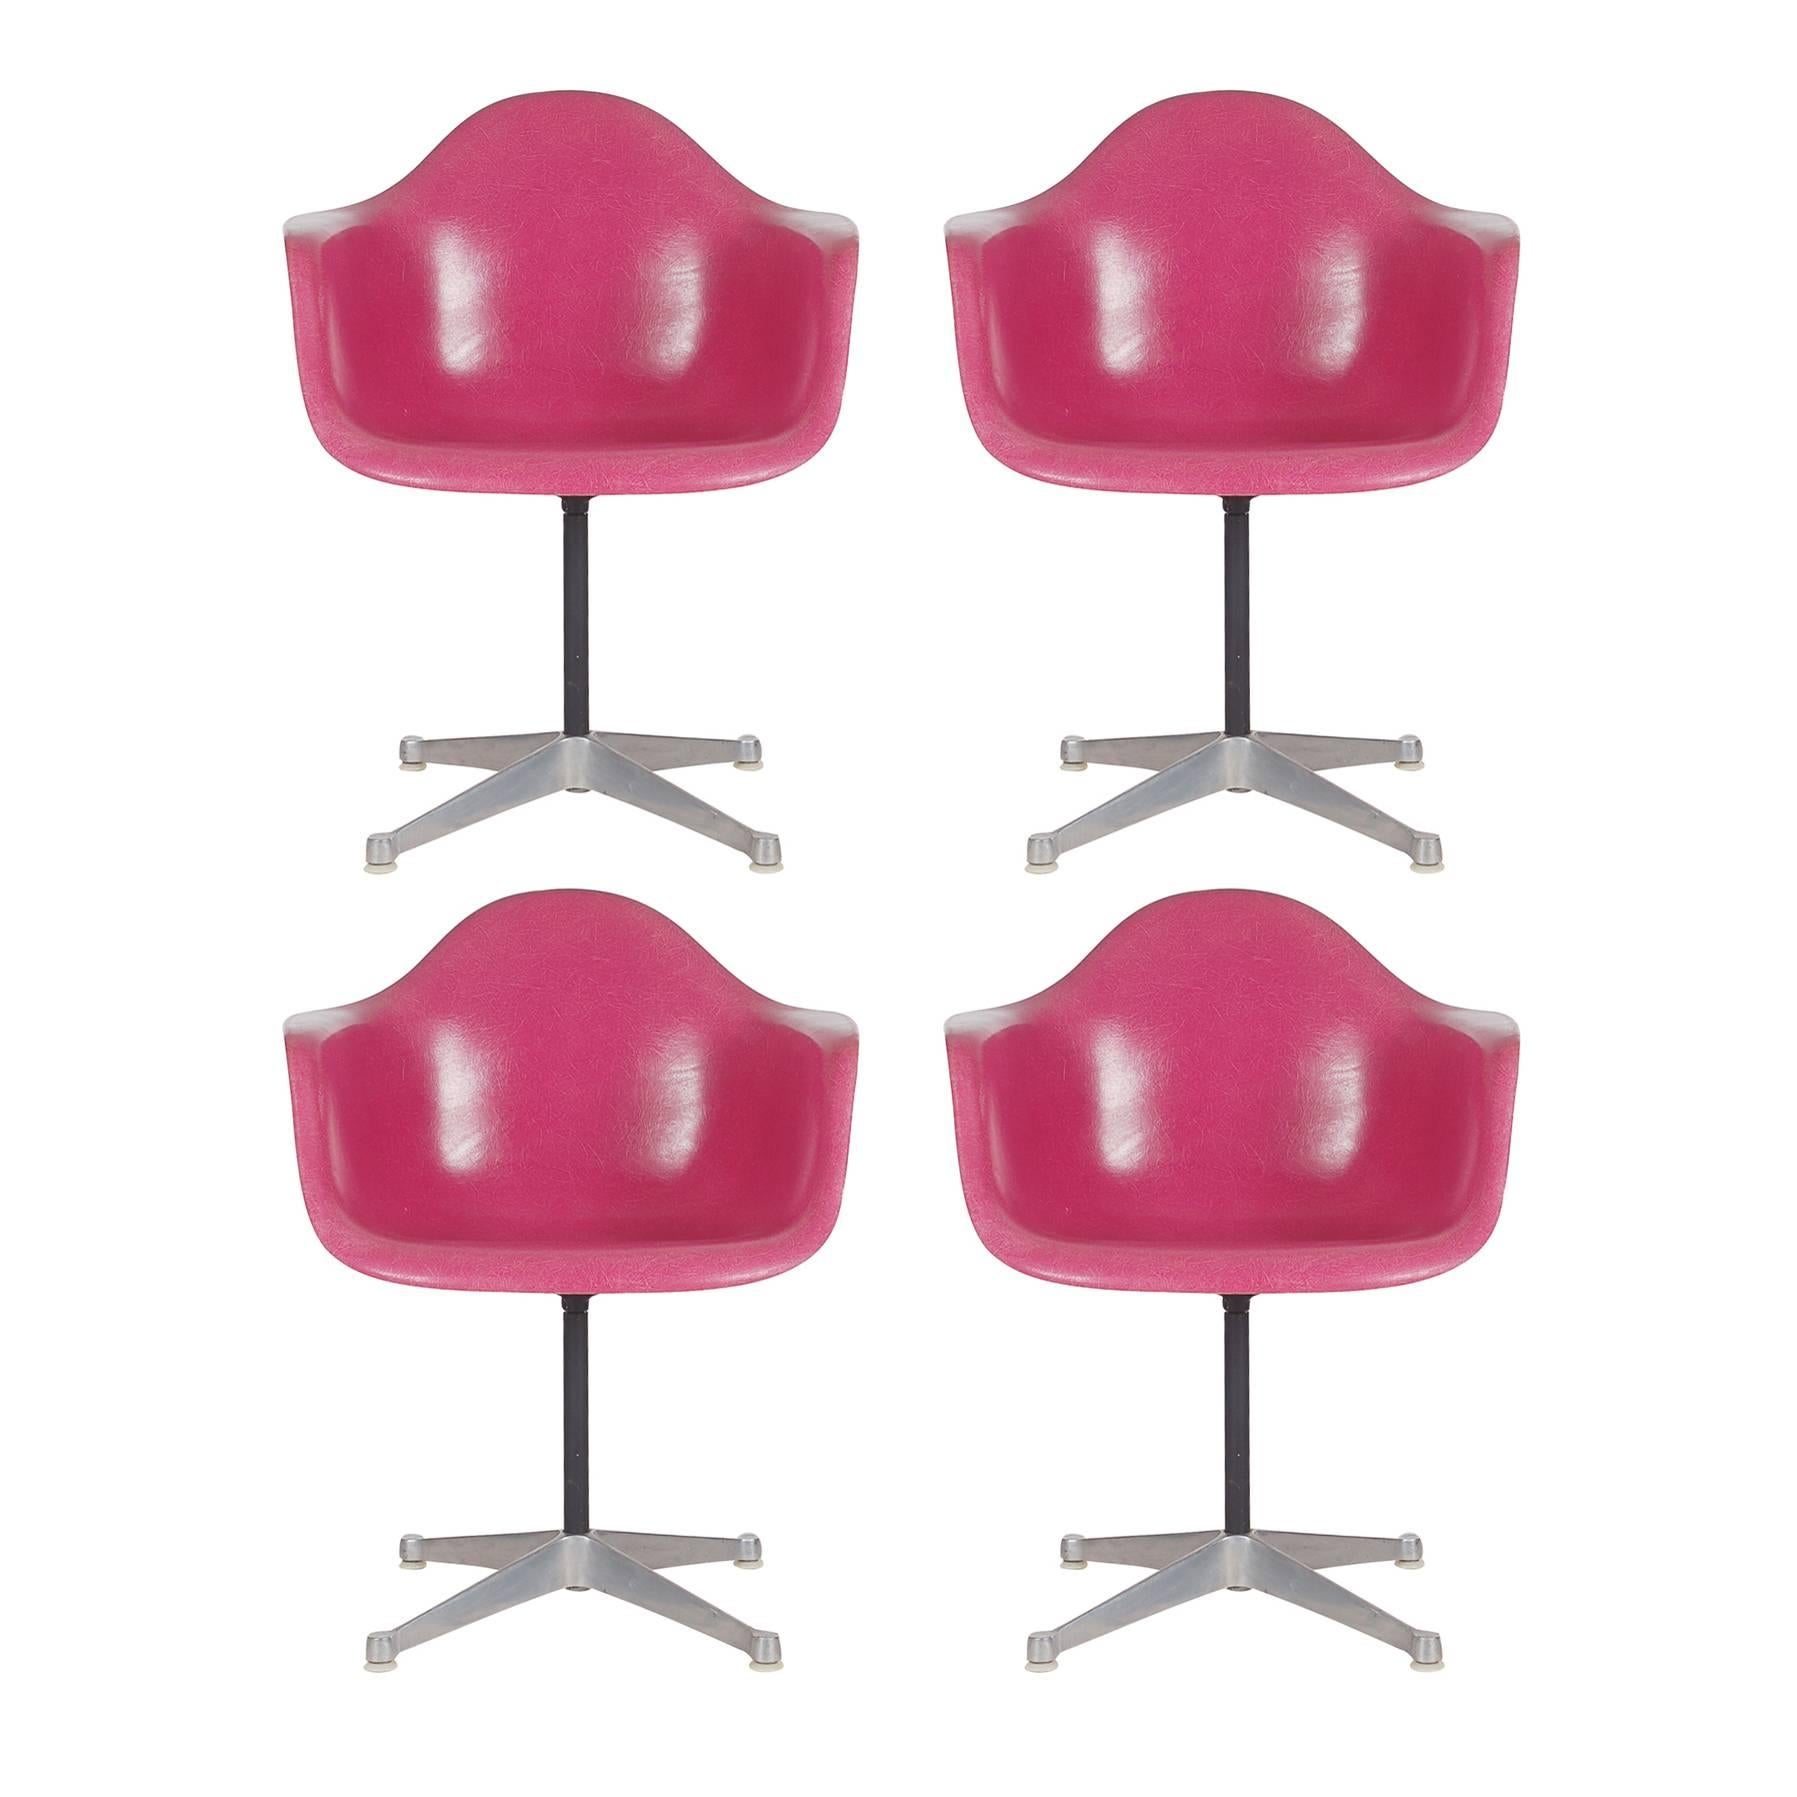 Rare Set of Four Hot Pink Fiberglass Chairs by Charles Eames for Herman Miller